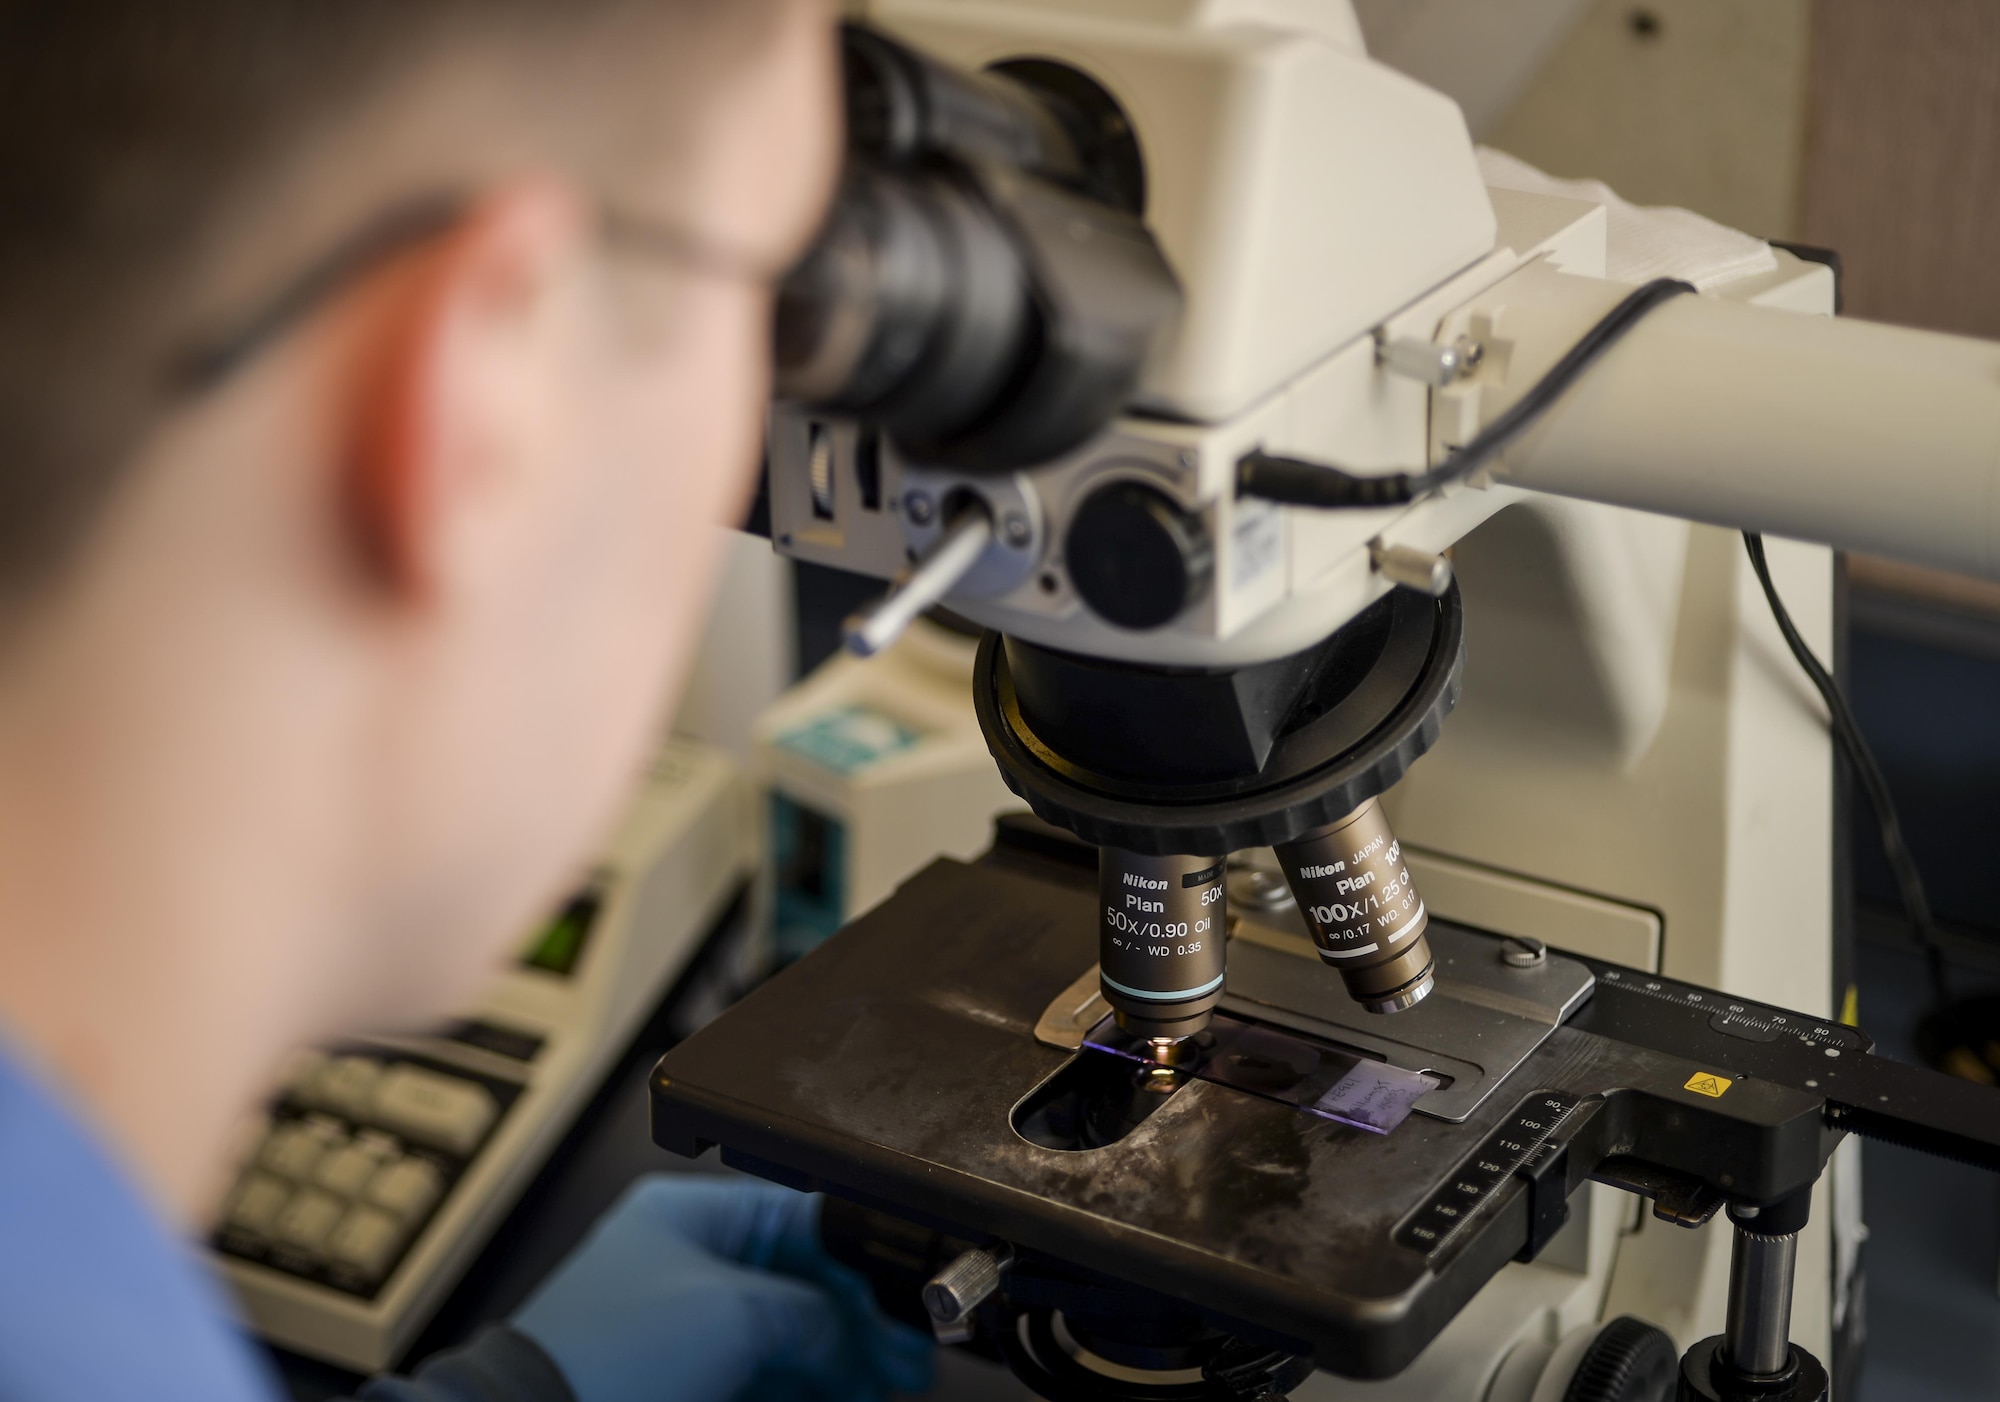 Senior Airman Josef Ansorge, 2nd Medical Support Squadron laboratory technician, uses a microscope to analyze a blood smear slide at Barksdale Air Force Base, La., Jan. 26, 2016. Microscopes used by technicians are flexible and provide multiple levels of magnification assisting in the screening of a variety of different specimens. (U.S. Air Force photo/Airman 1st Class Mozer O. Da Cunha)